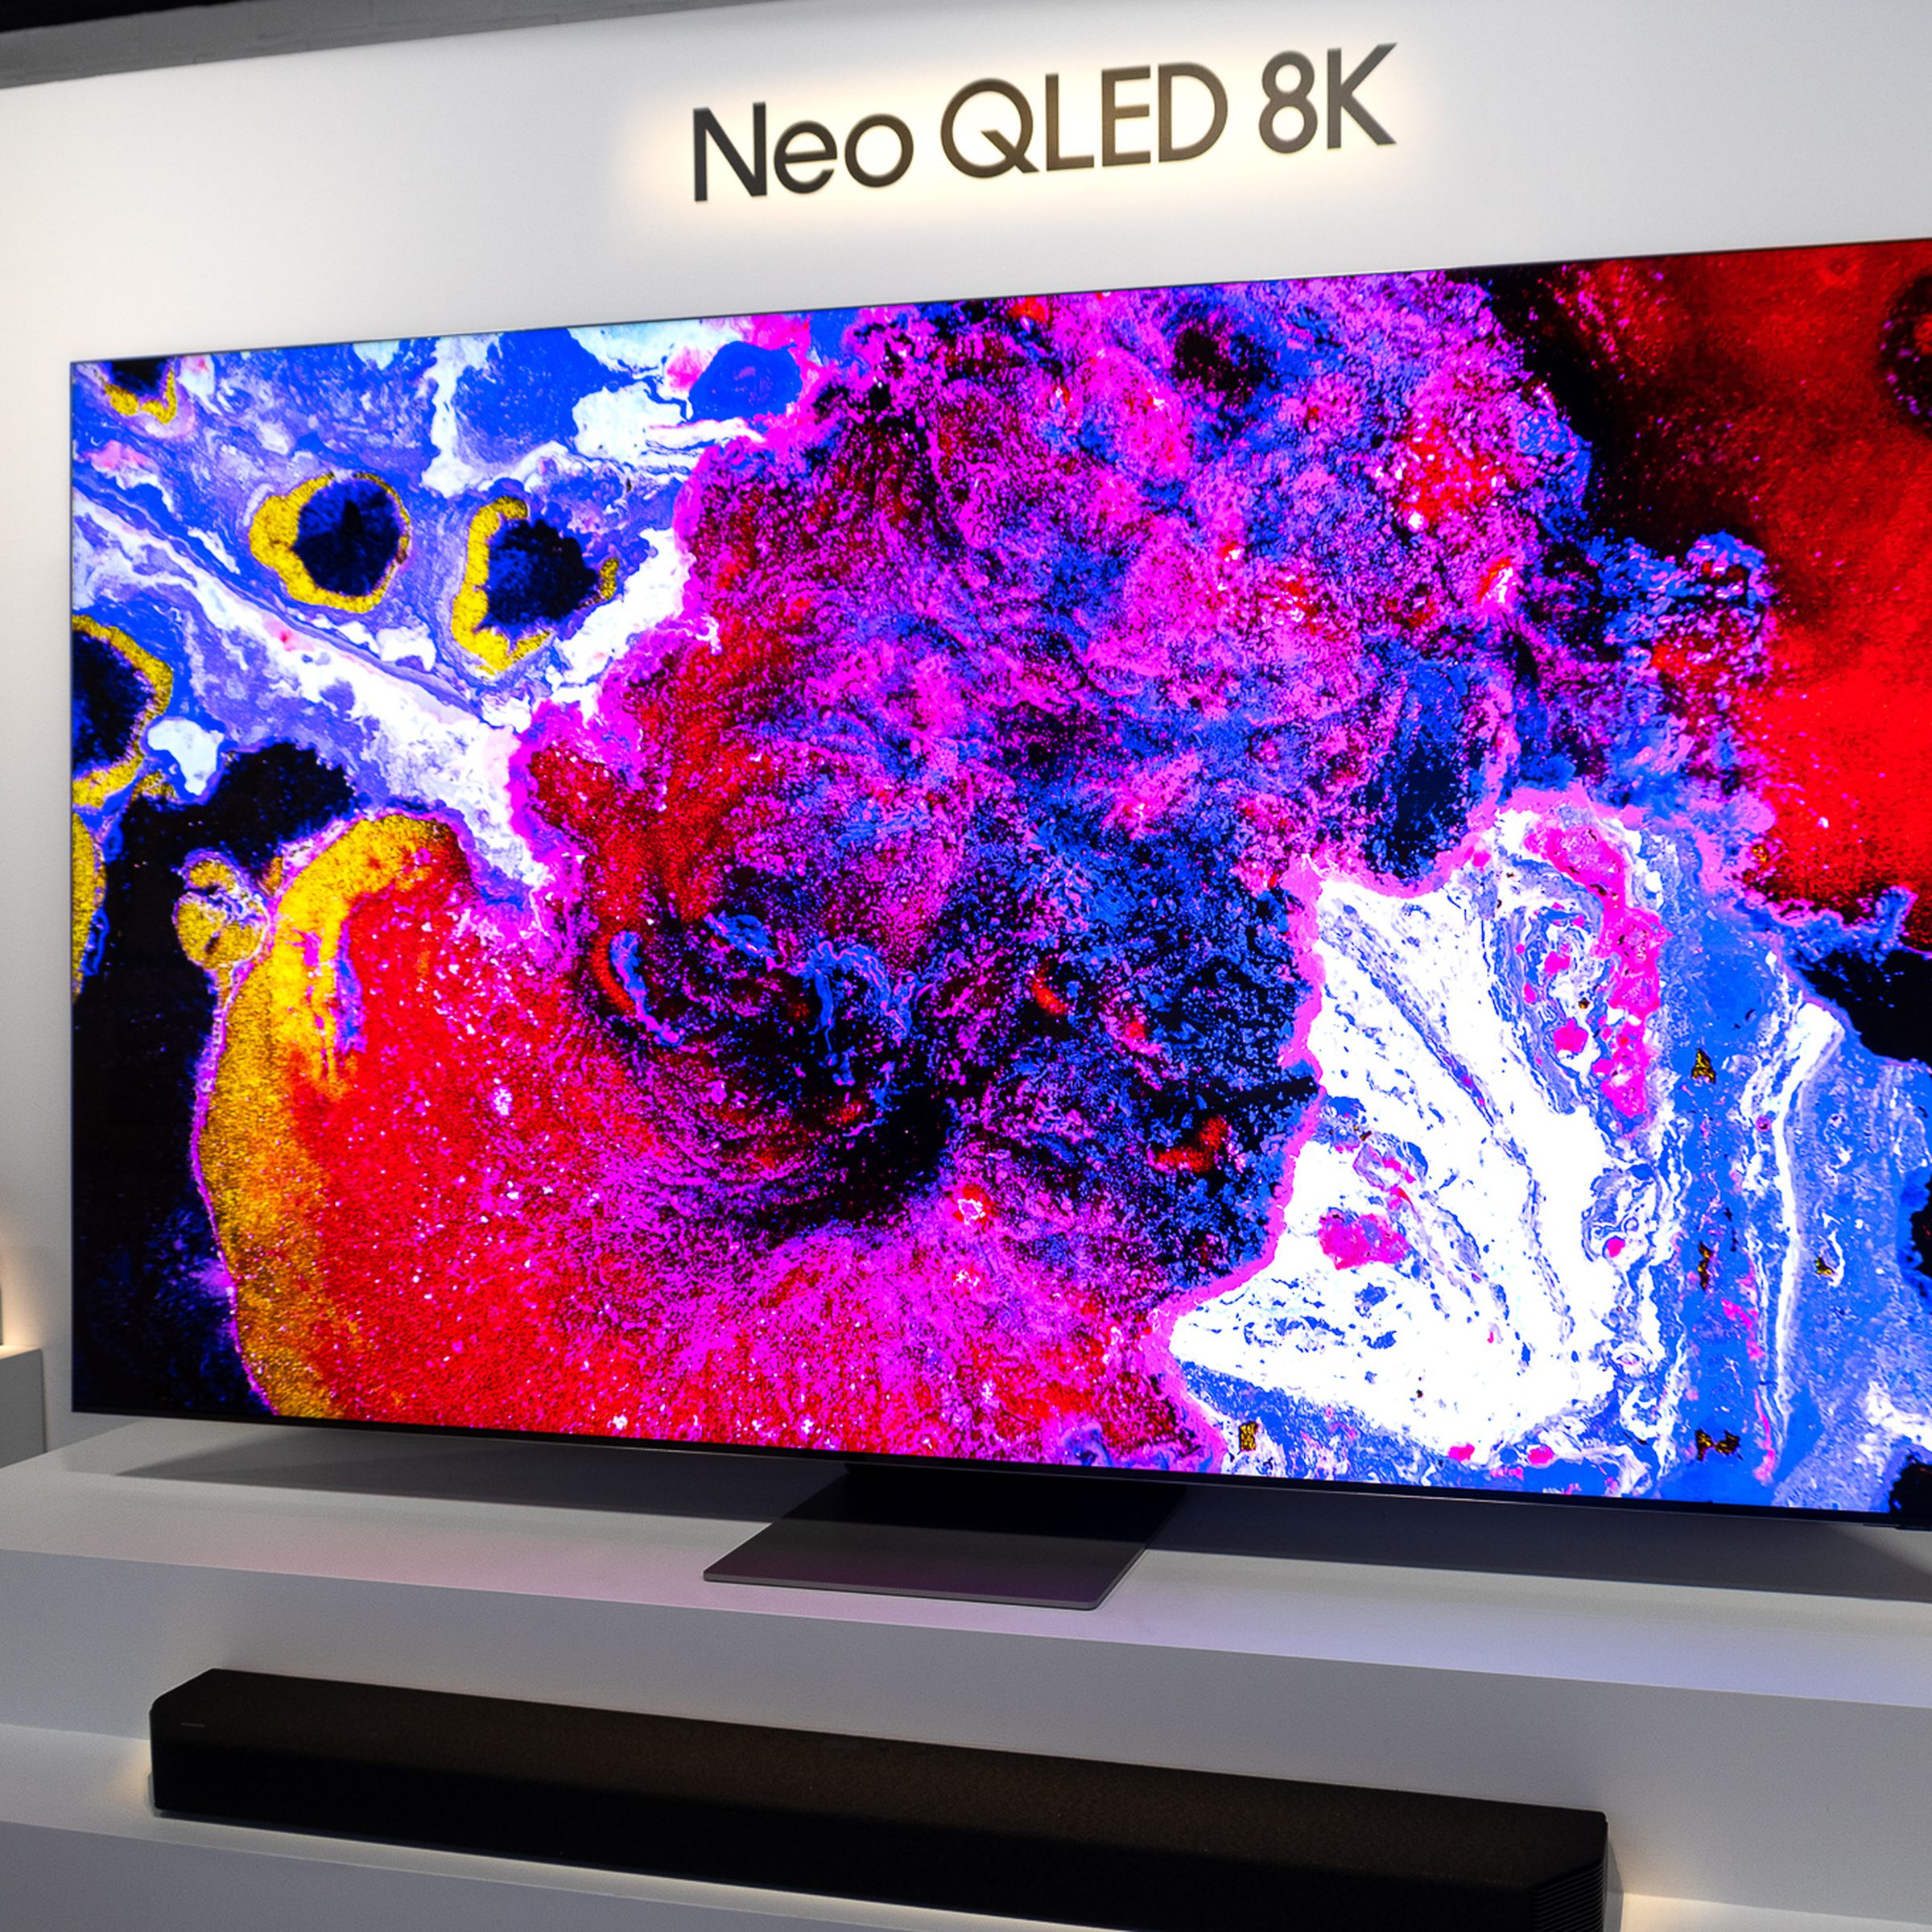 Pictured is a Samsung Neo QLED TV, one of the best TVs to buy for the 2022 Super Bowl LVI — along with others from LG, TCL, and more.